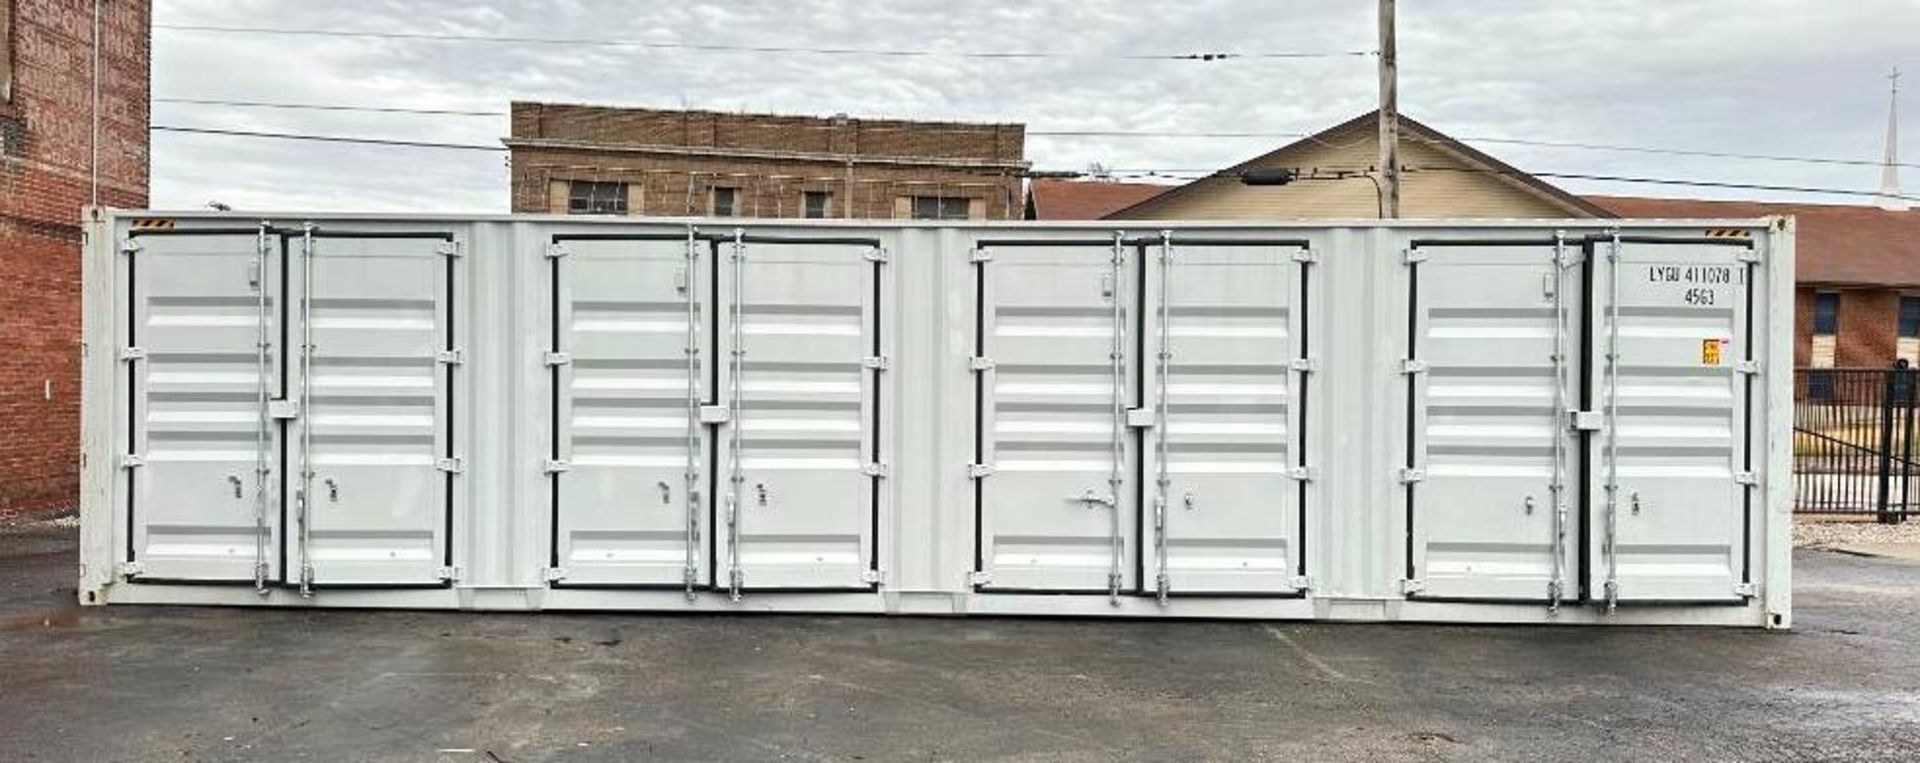 2022 40FT MULTI-DOOR SHIPPING CONTAINER BRAND/MODEL: LYGU 45G3 INFORMATION: NEW,2022 STORAGE CONTAIN